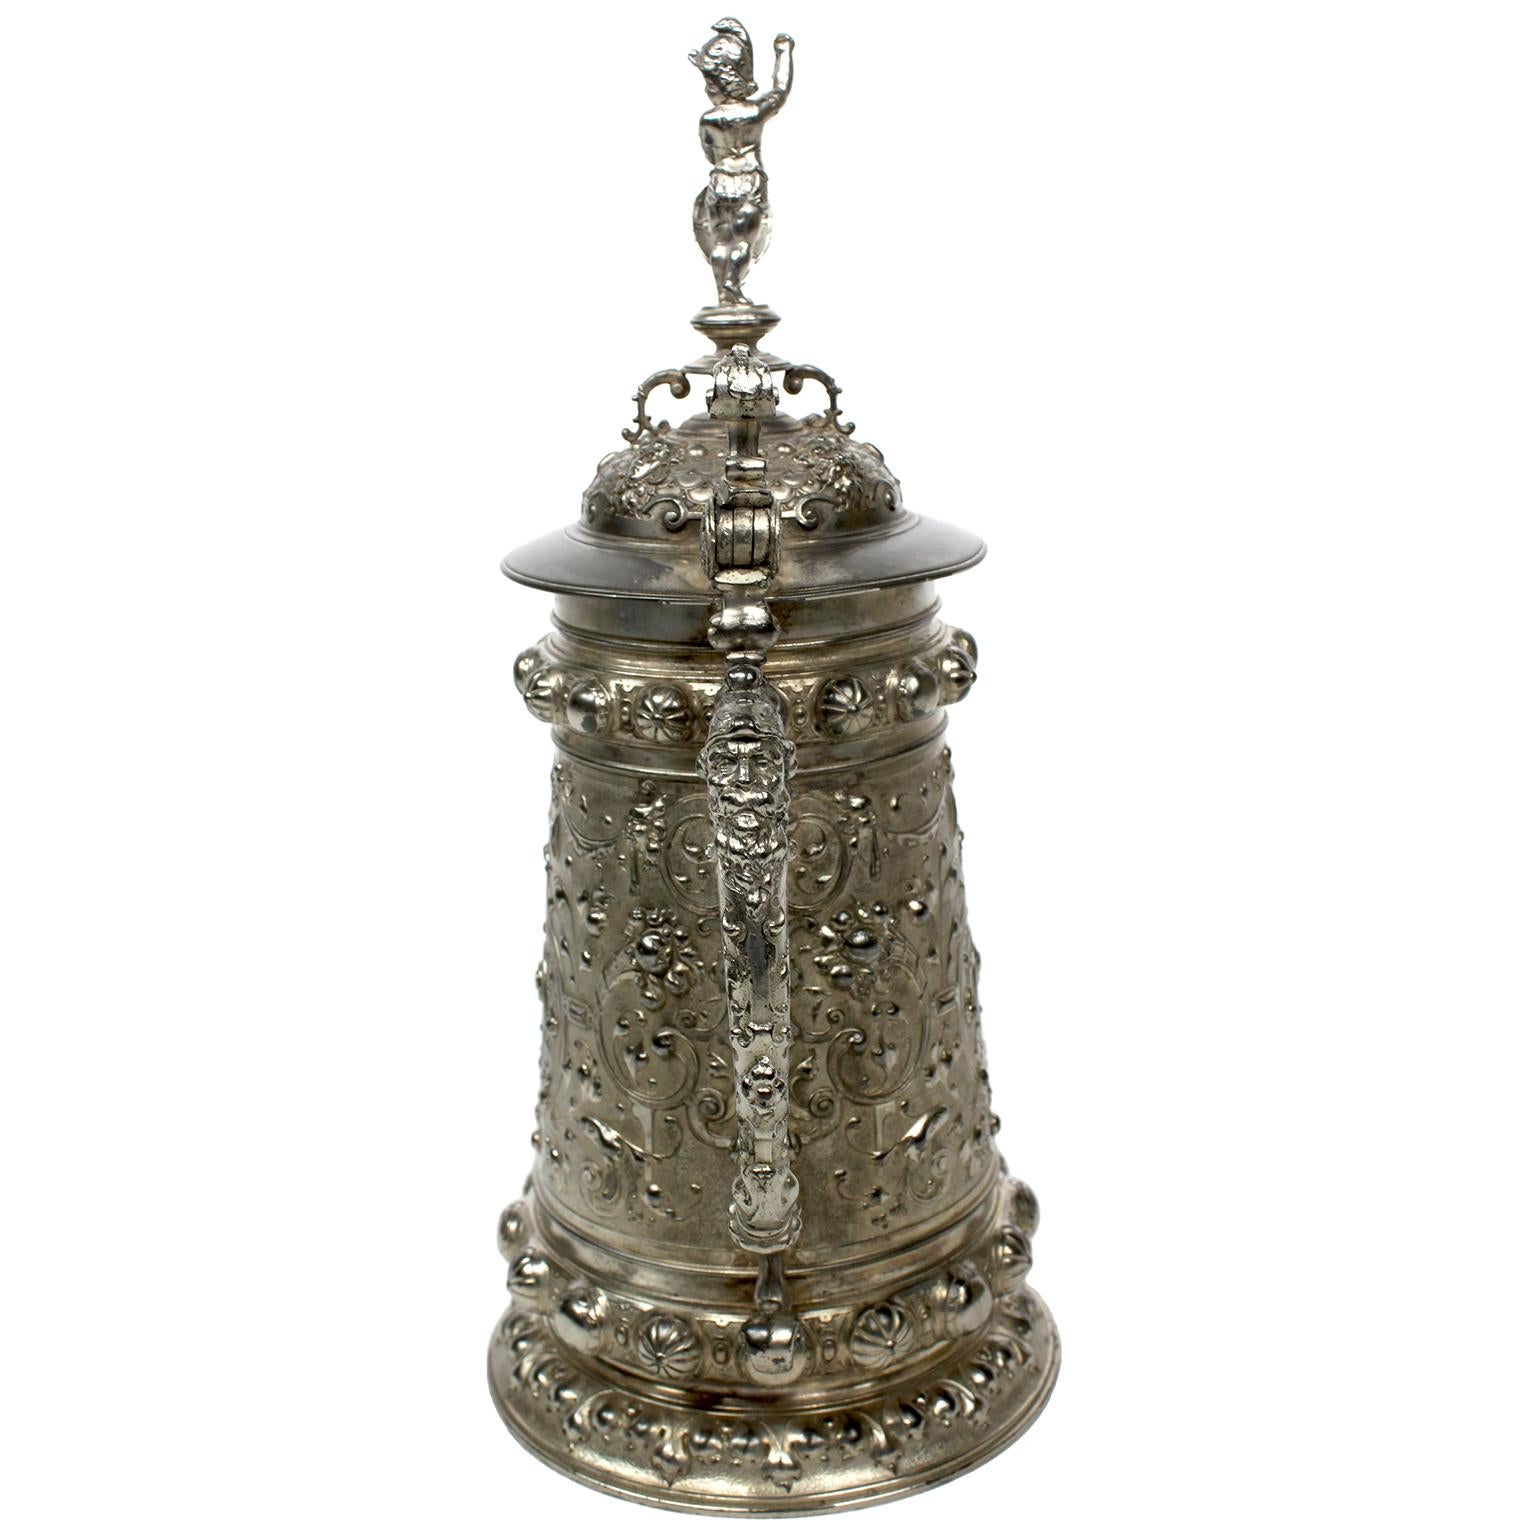 19th Century Renaissance Revival Style Britannia Silver Plated WMF Beer-Tankard In Fair Condition For Sale In Los Angeles, CA